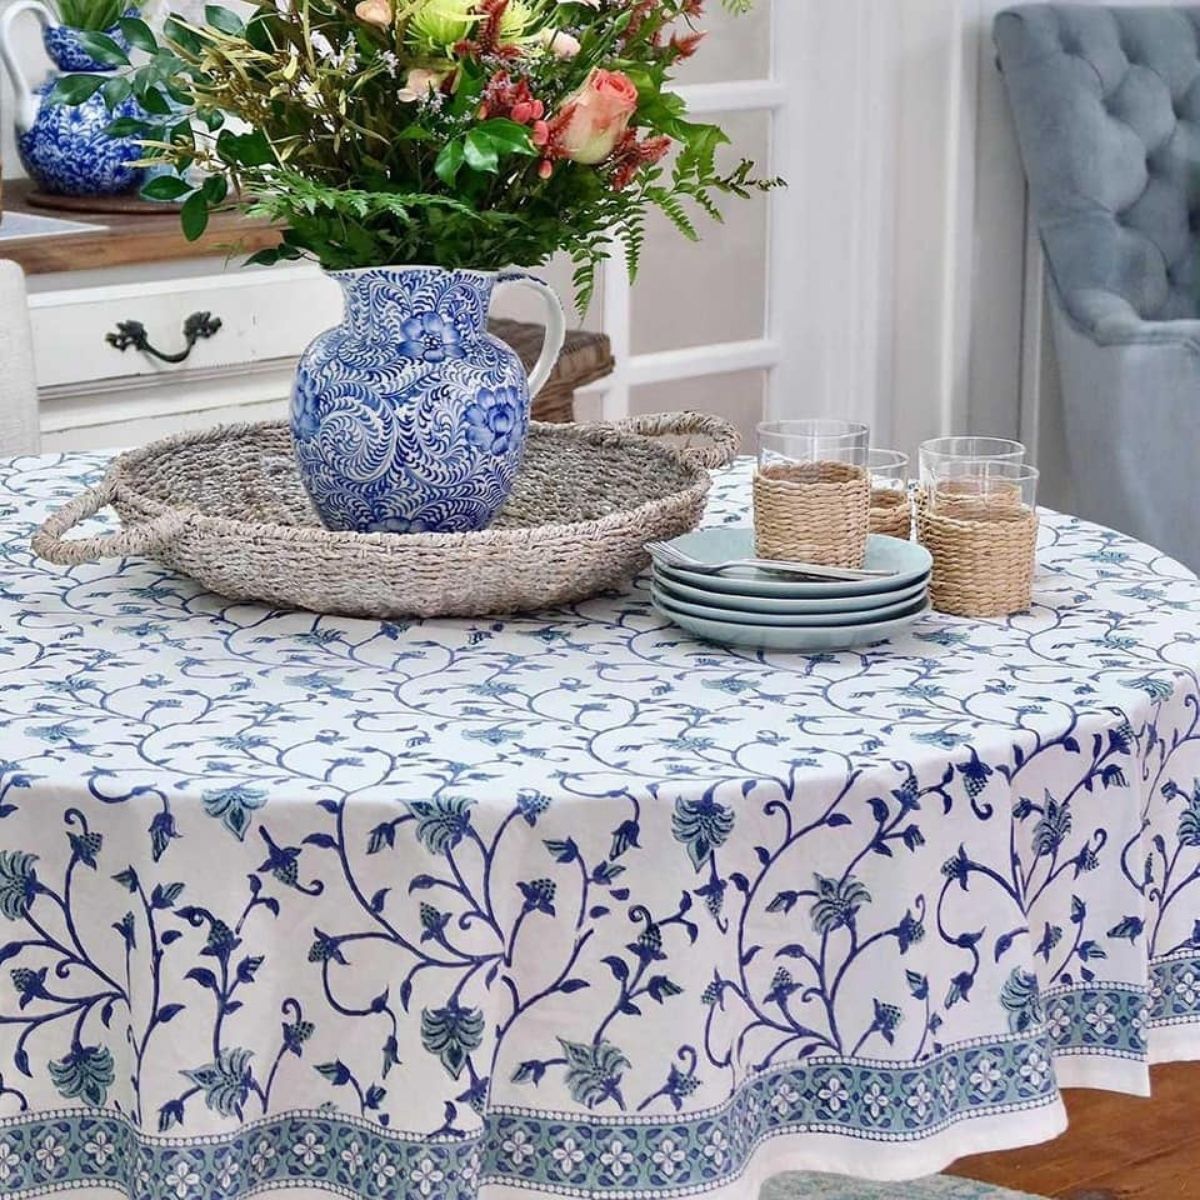 Choosing the Perfect Round Tablecloth